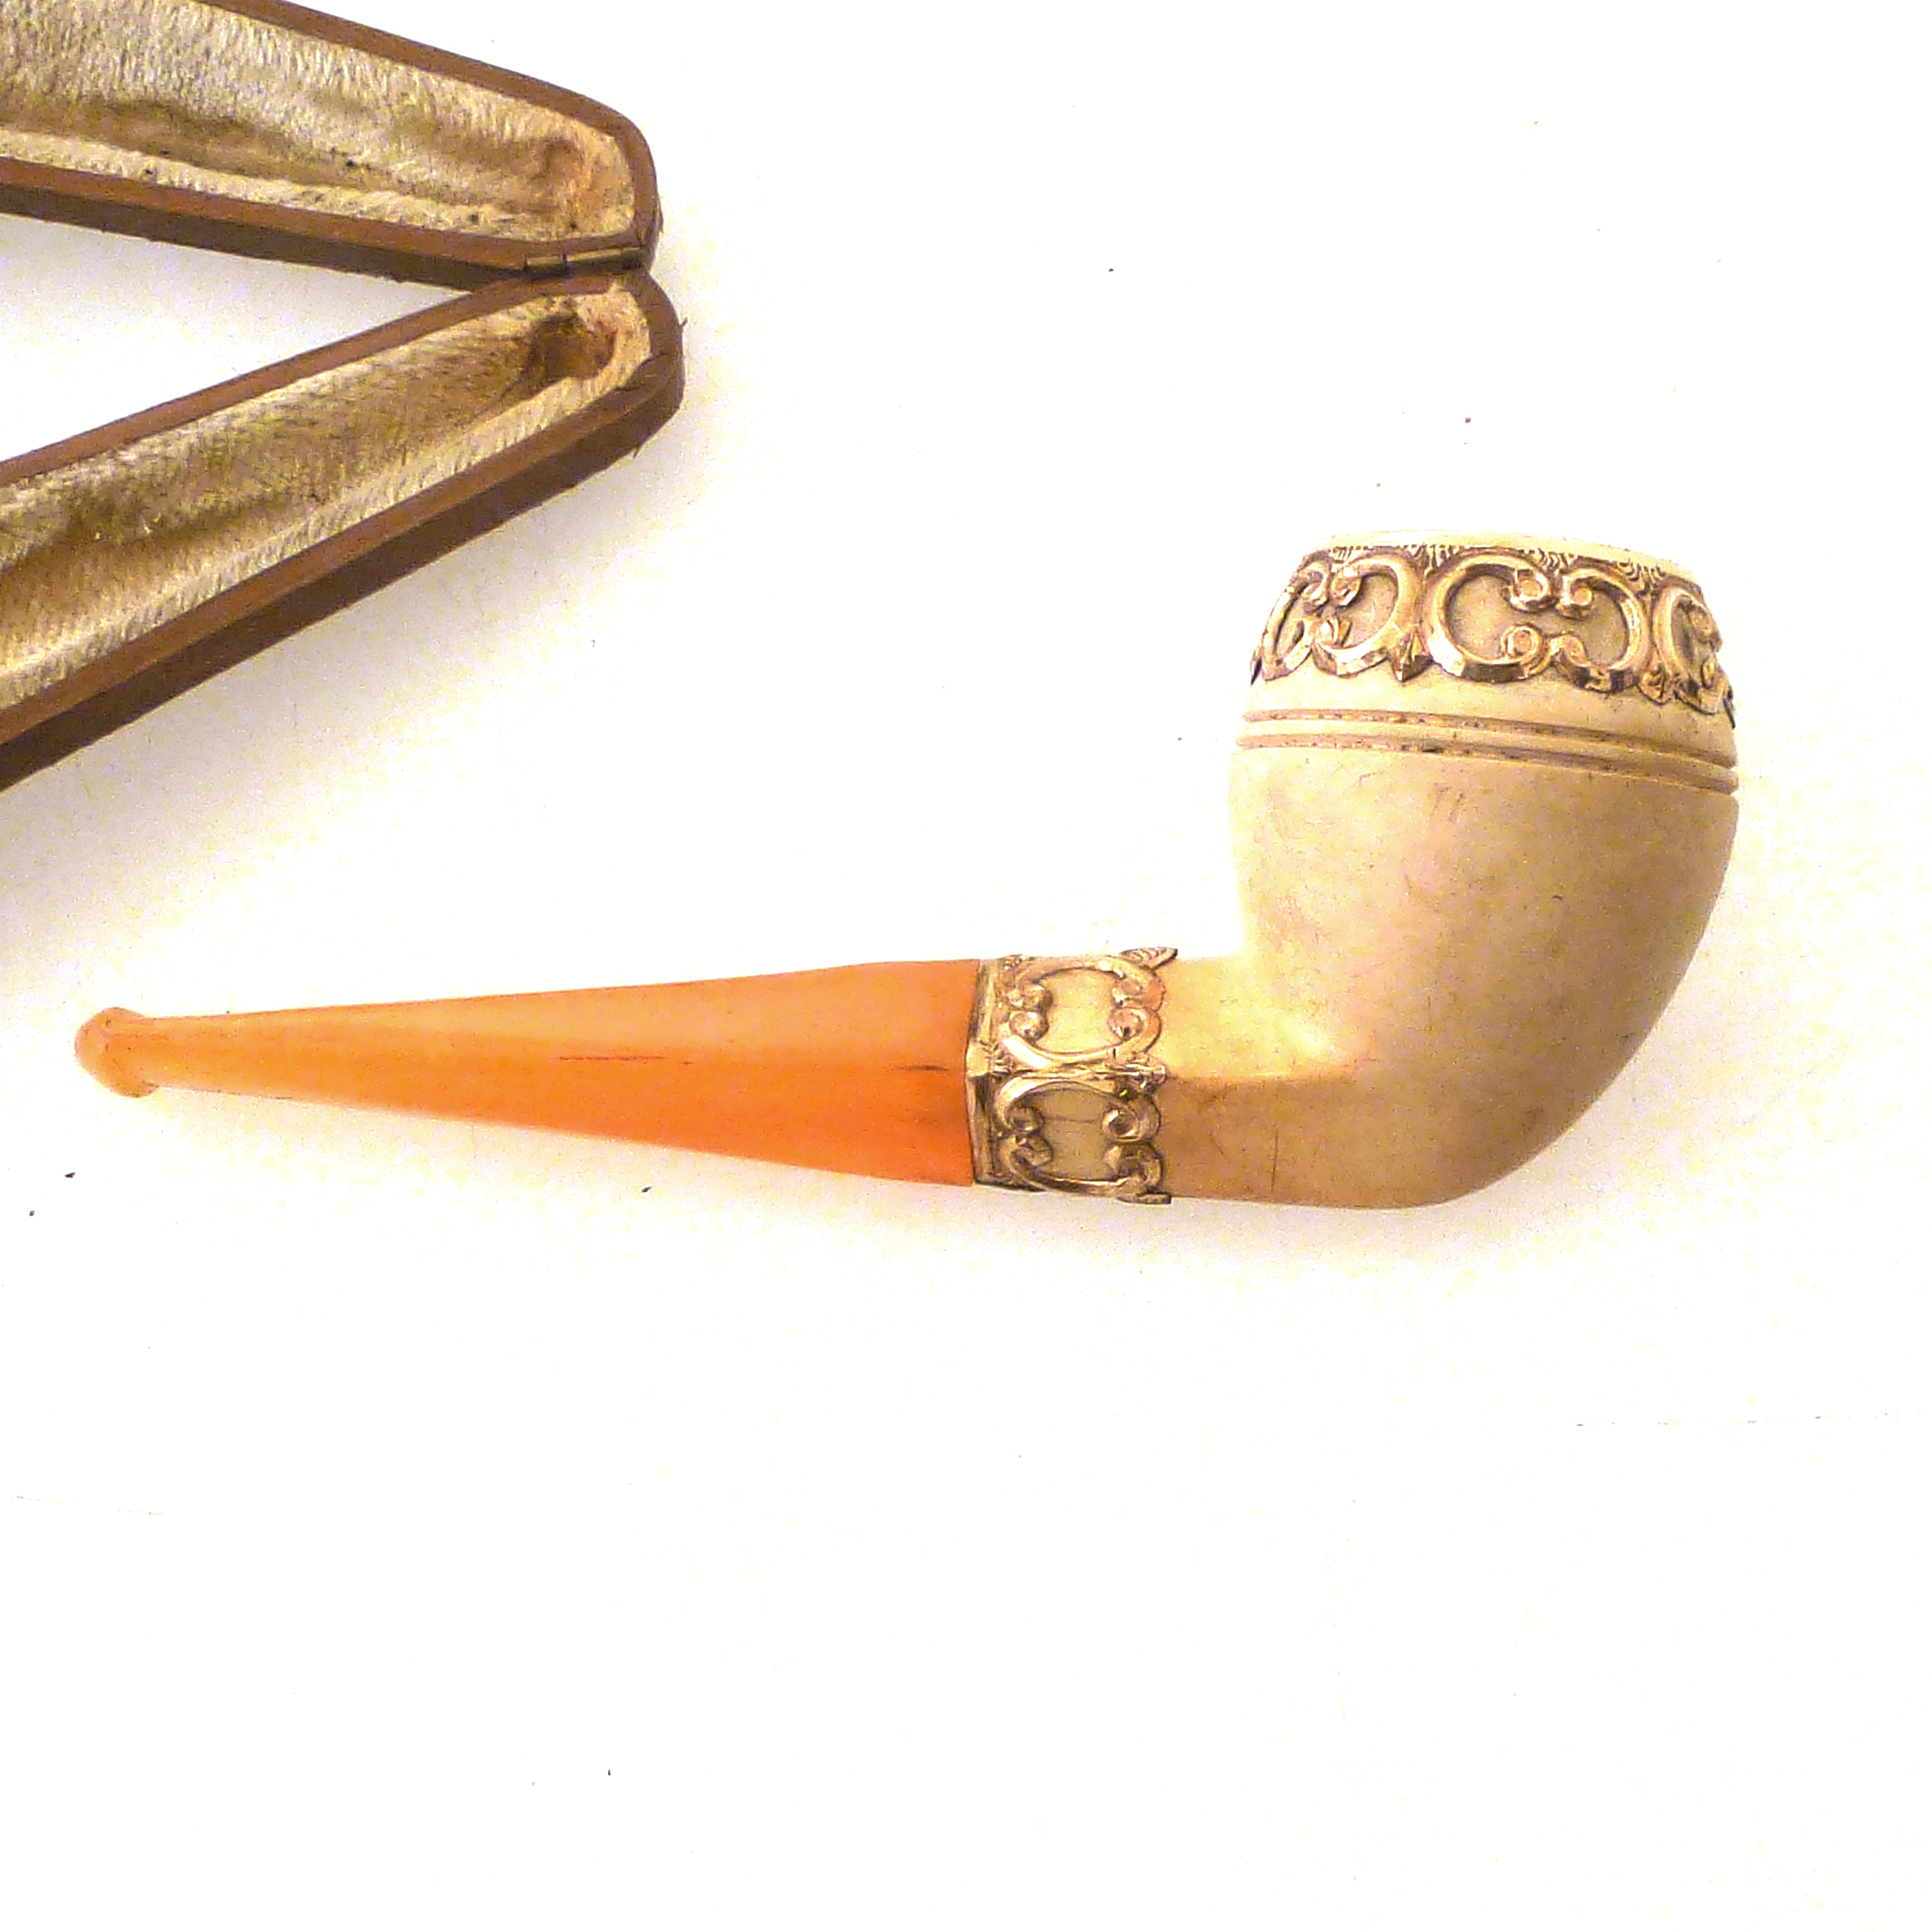 MEERSCHAUM PIPE IN CASE APPROX L: 5" - Image 2 of 3